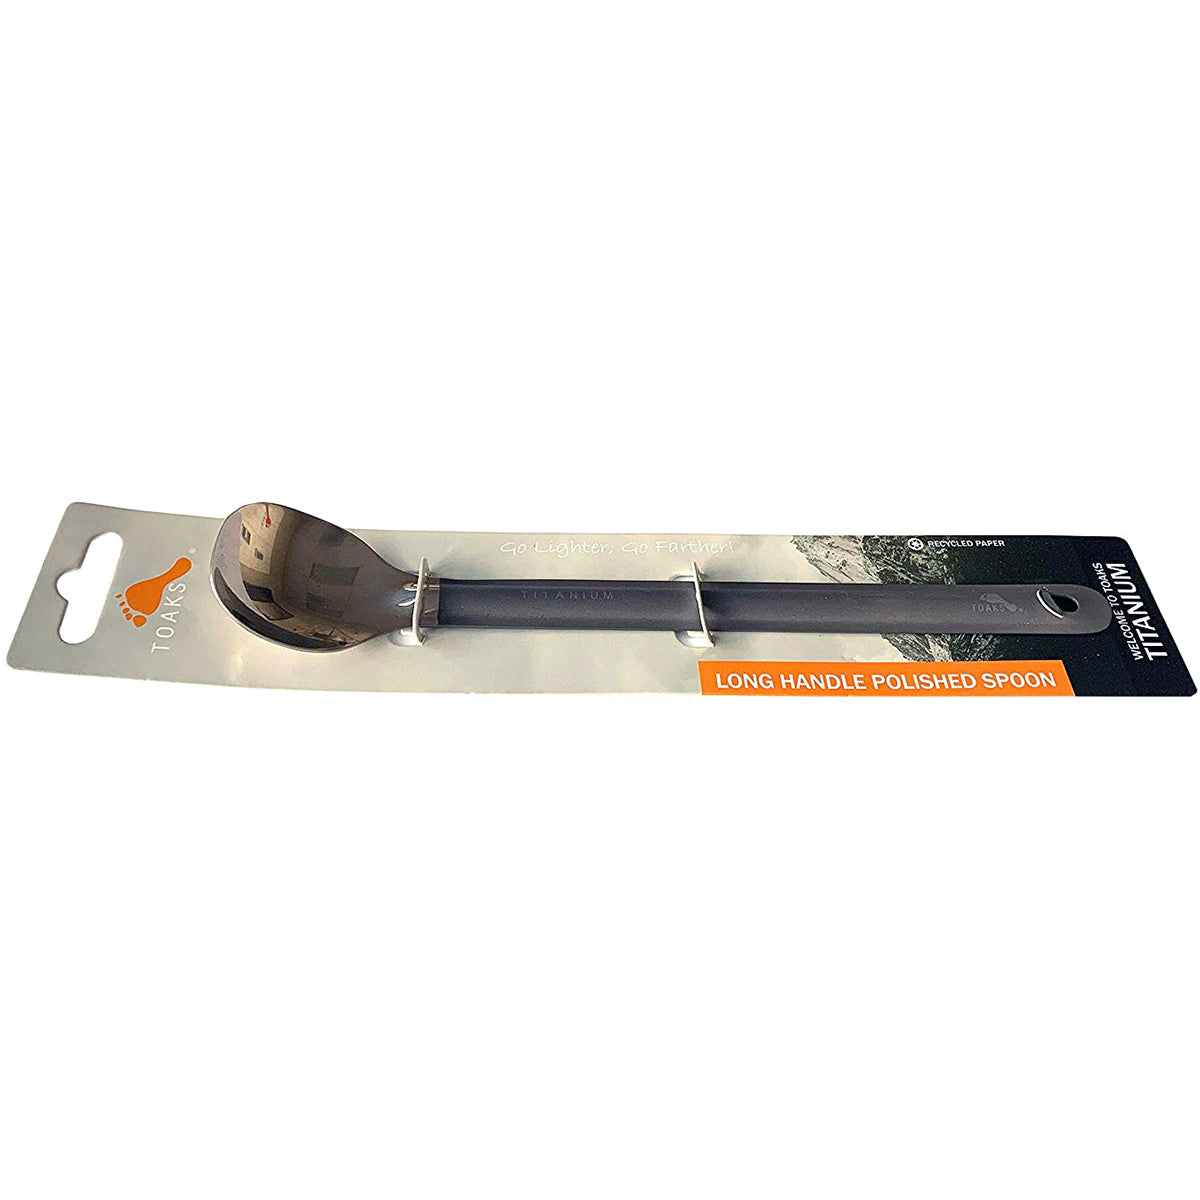 TOAKS Ultralight Long Handled Titanium Camping Spoon with Polished Head TOAKS